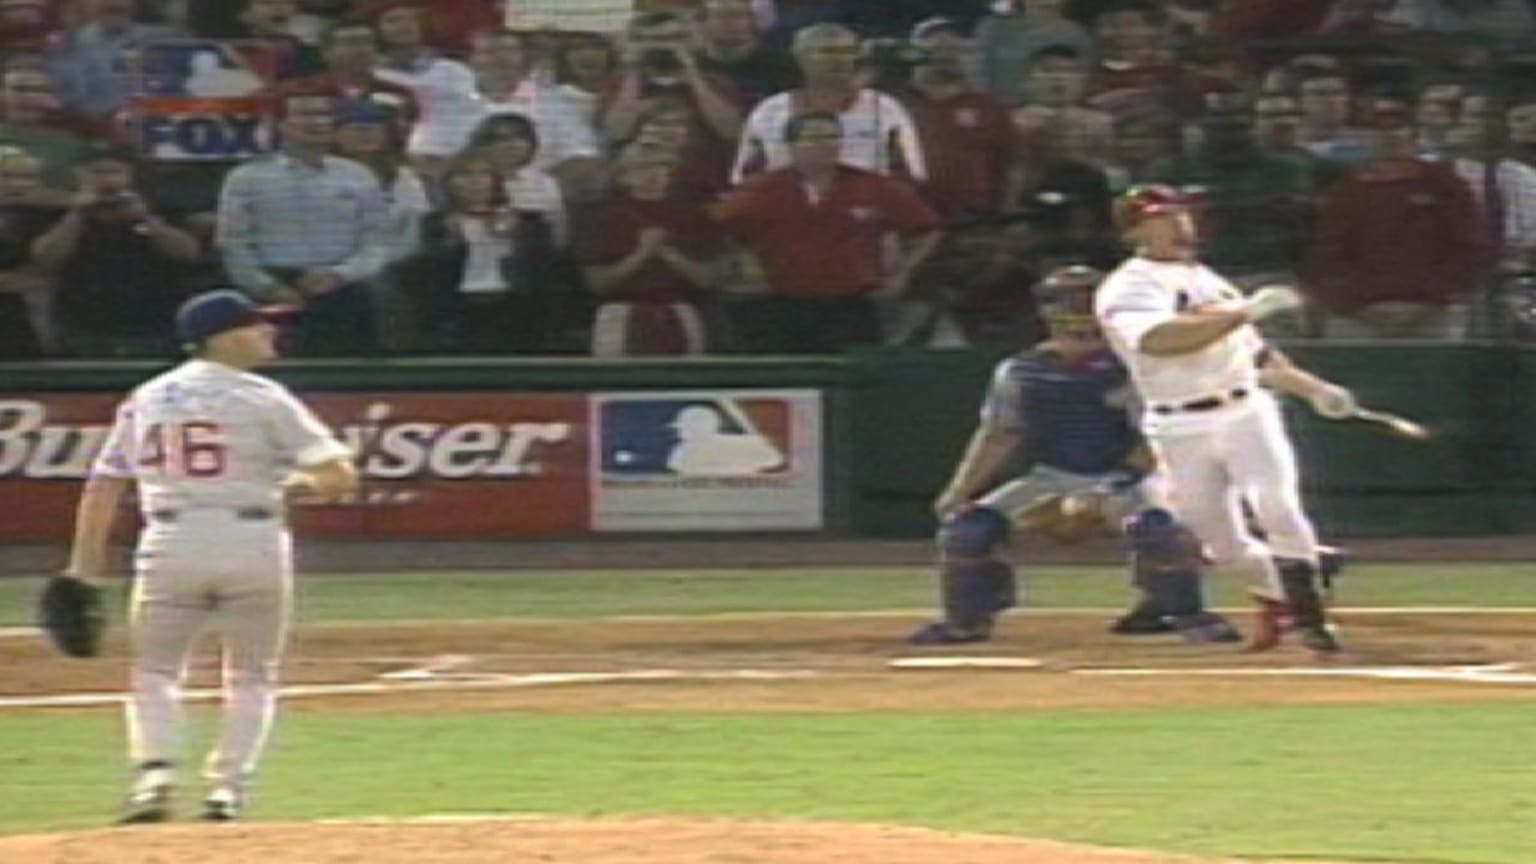 On this day in 1998 Mark McGwire broke the home run record - A